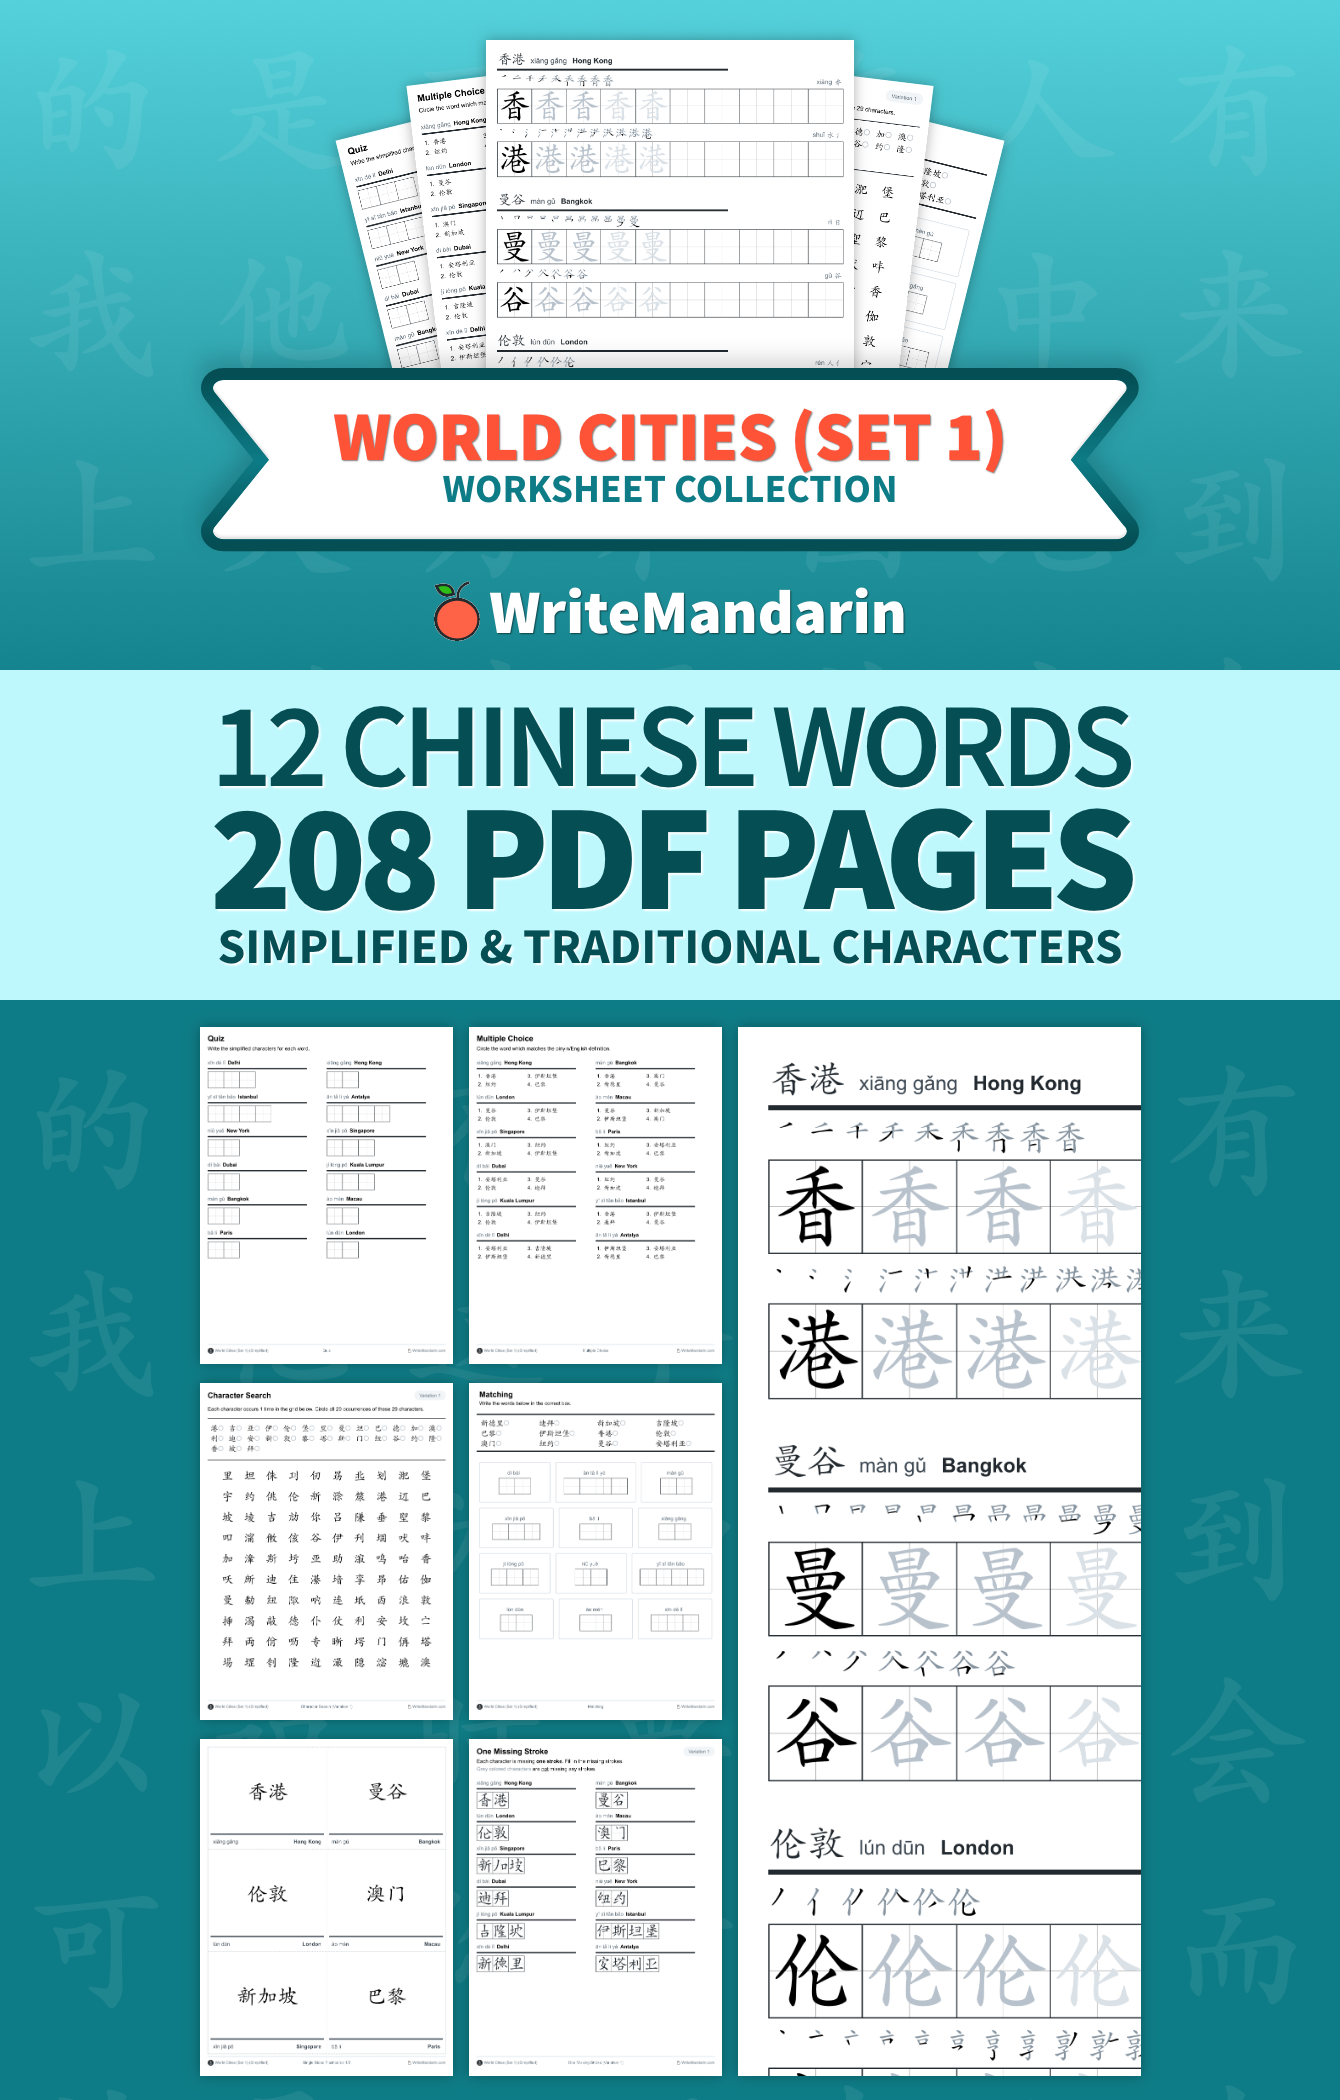 Preview image of World Cities (Set 1) worksheet collection